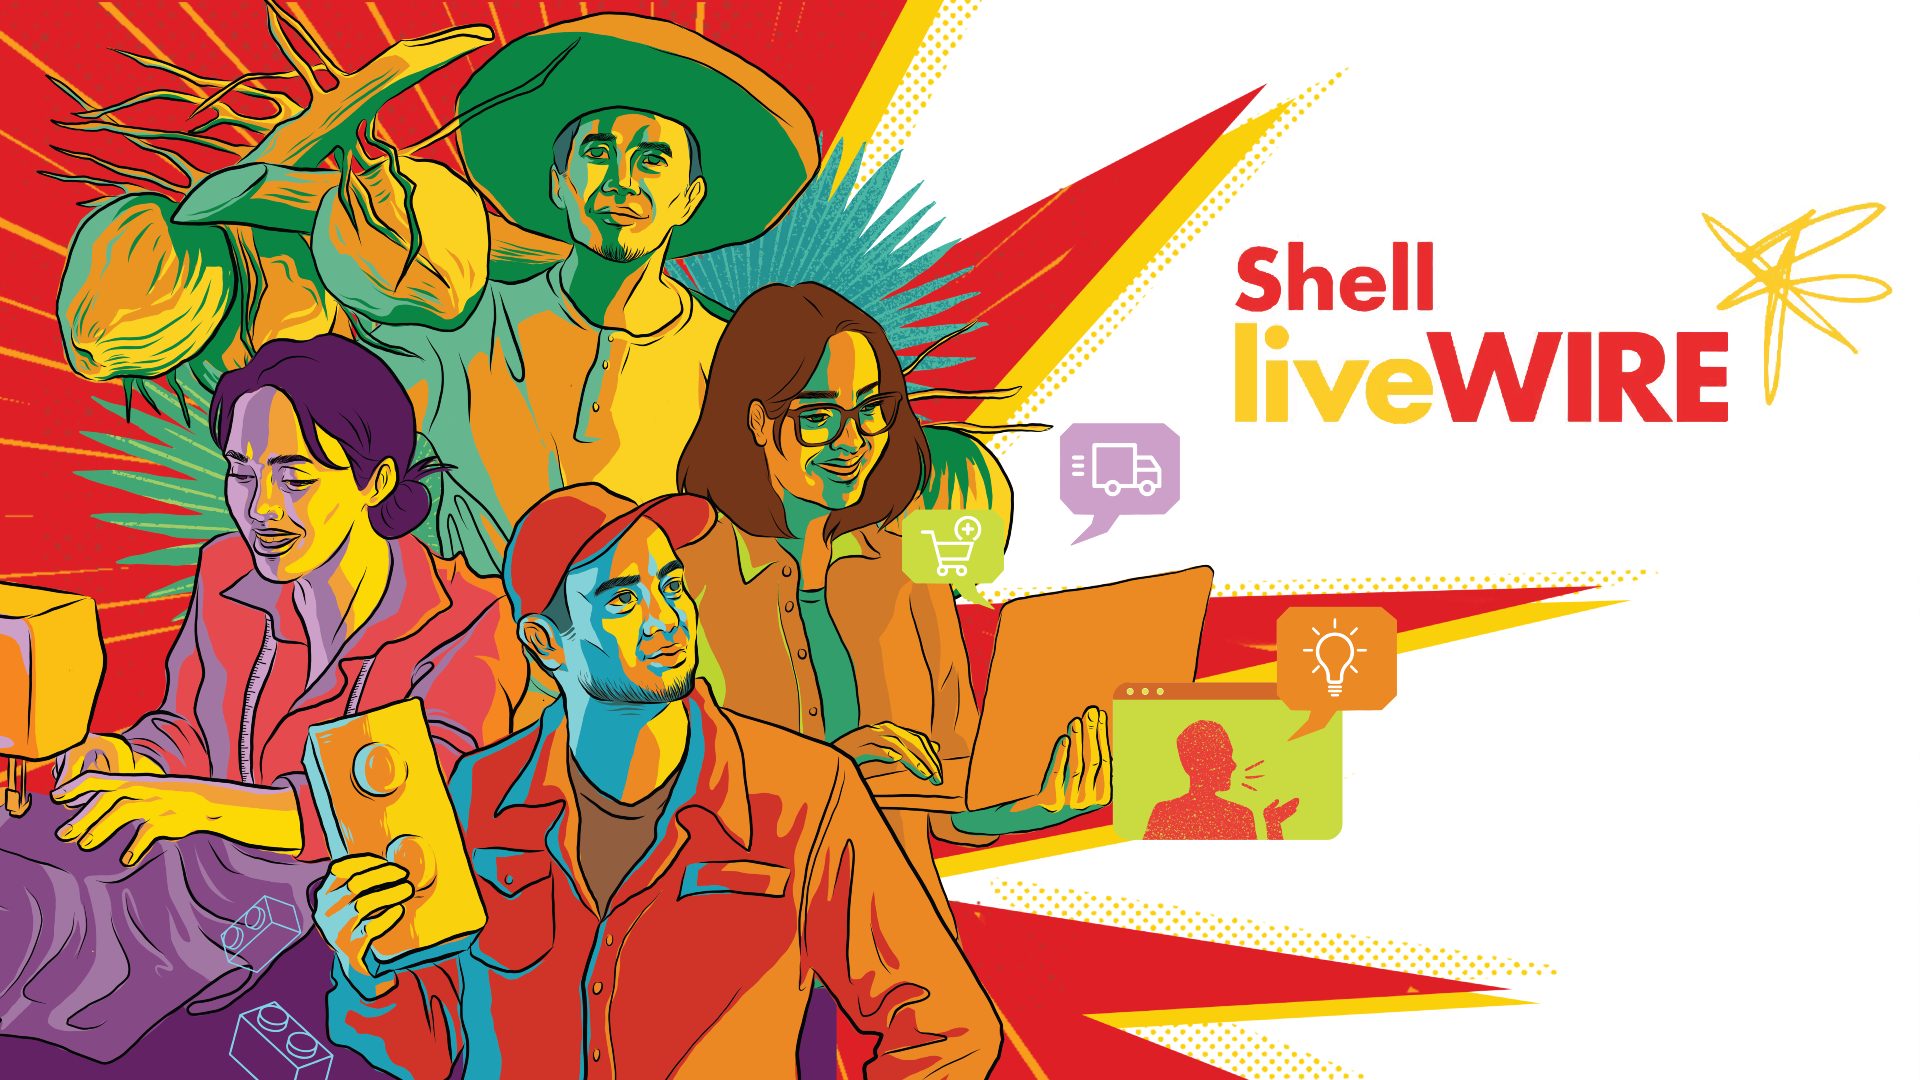 Pilipinas Shell’s LiveWIRE acceleration program is ‘Sandbox’ for PH startups